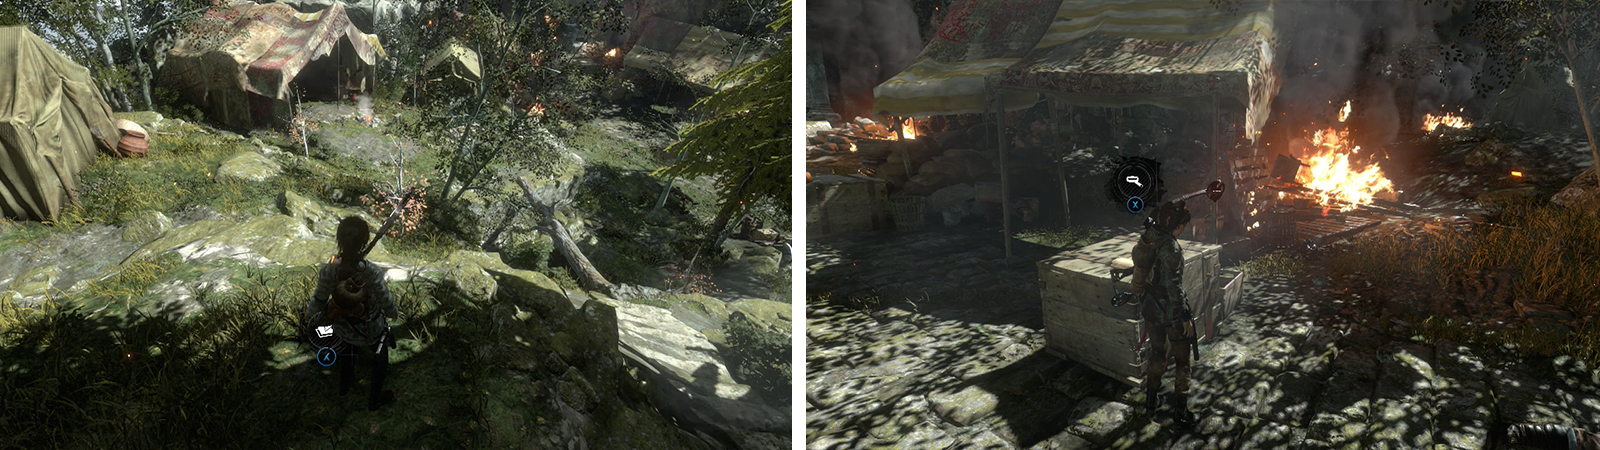 Before enetering town grab Survival Cache 01 (left). Opposite the Base Camp you’ll find Document 02 (right).